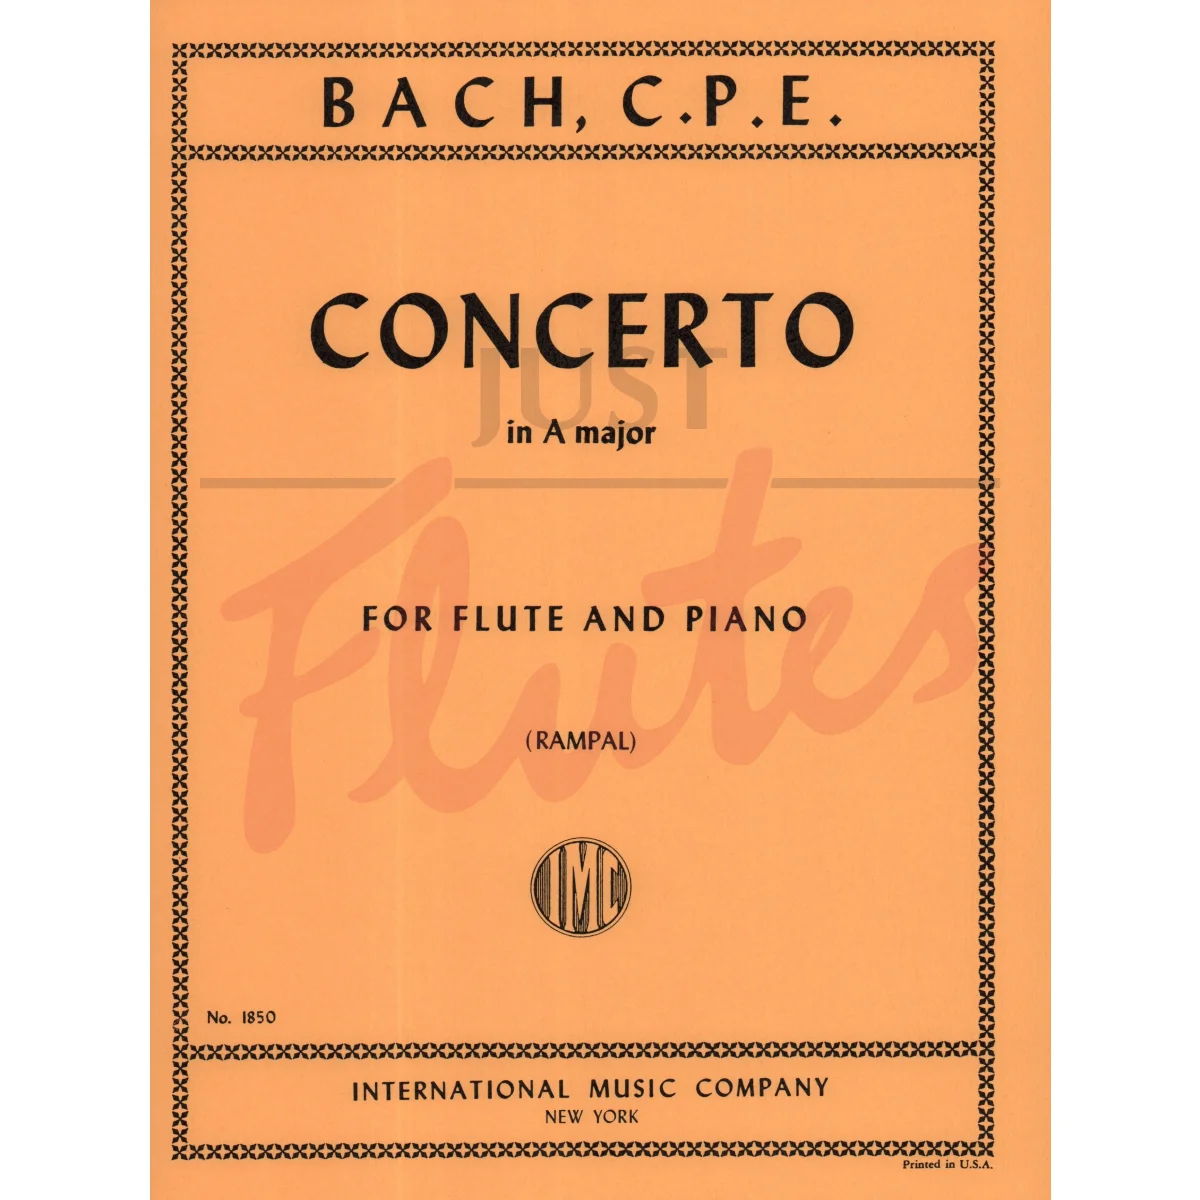 Concerto in A major for Flute and Piano